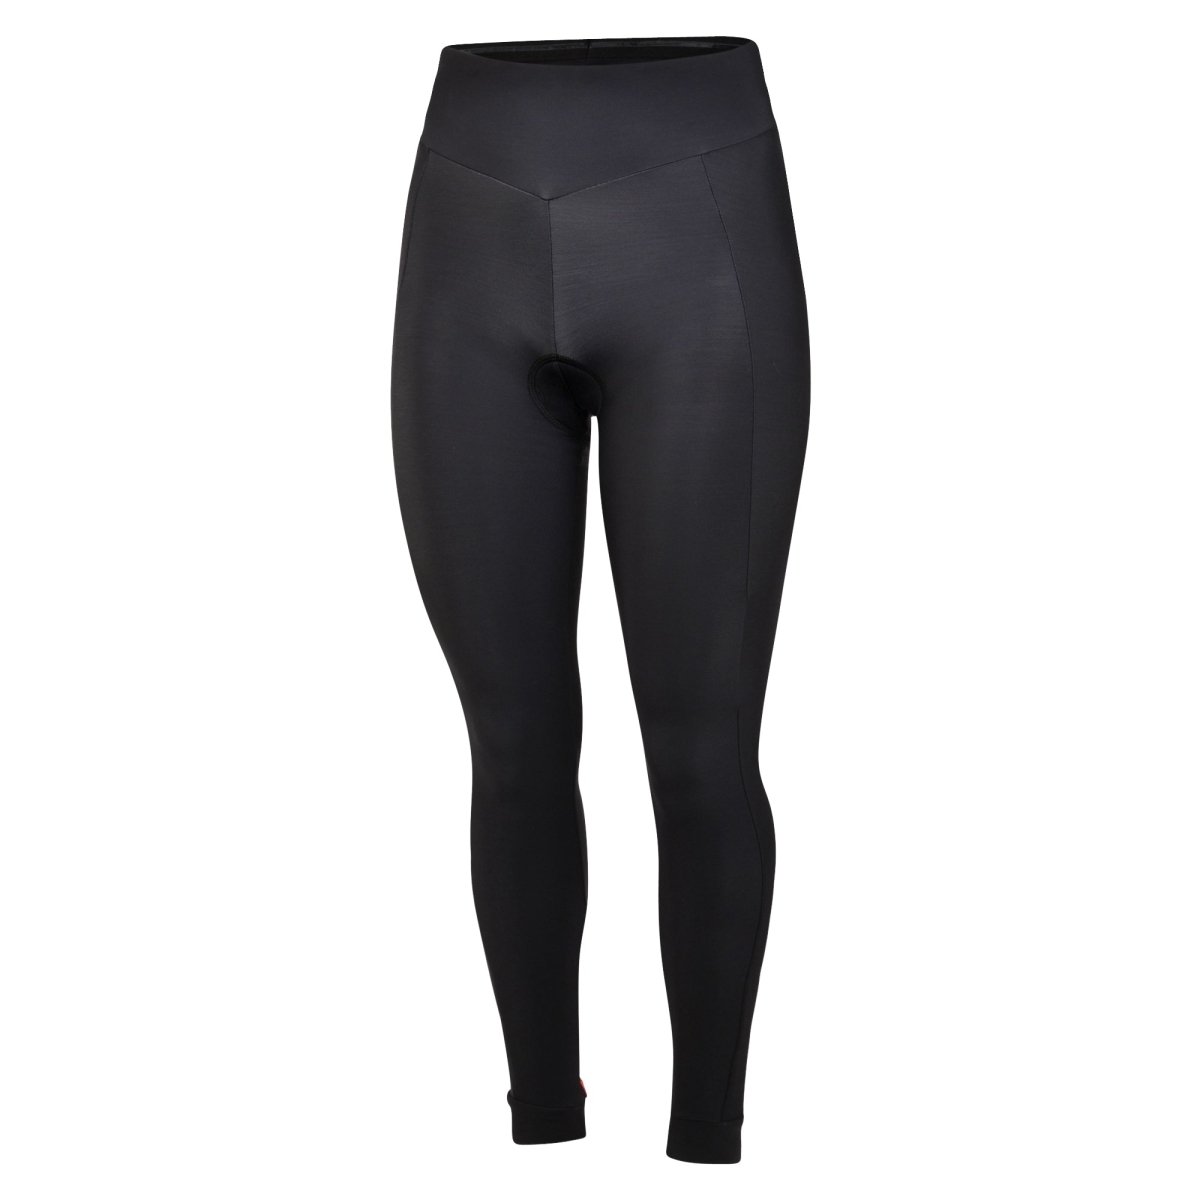 Womens Black Winter Thermal Padded Cycling Tights